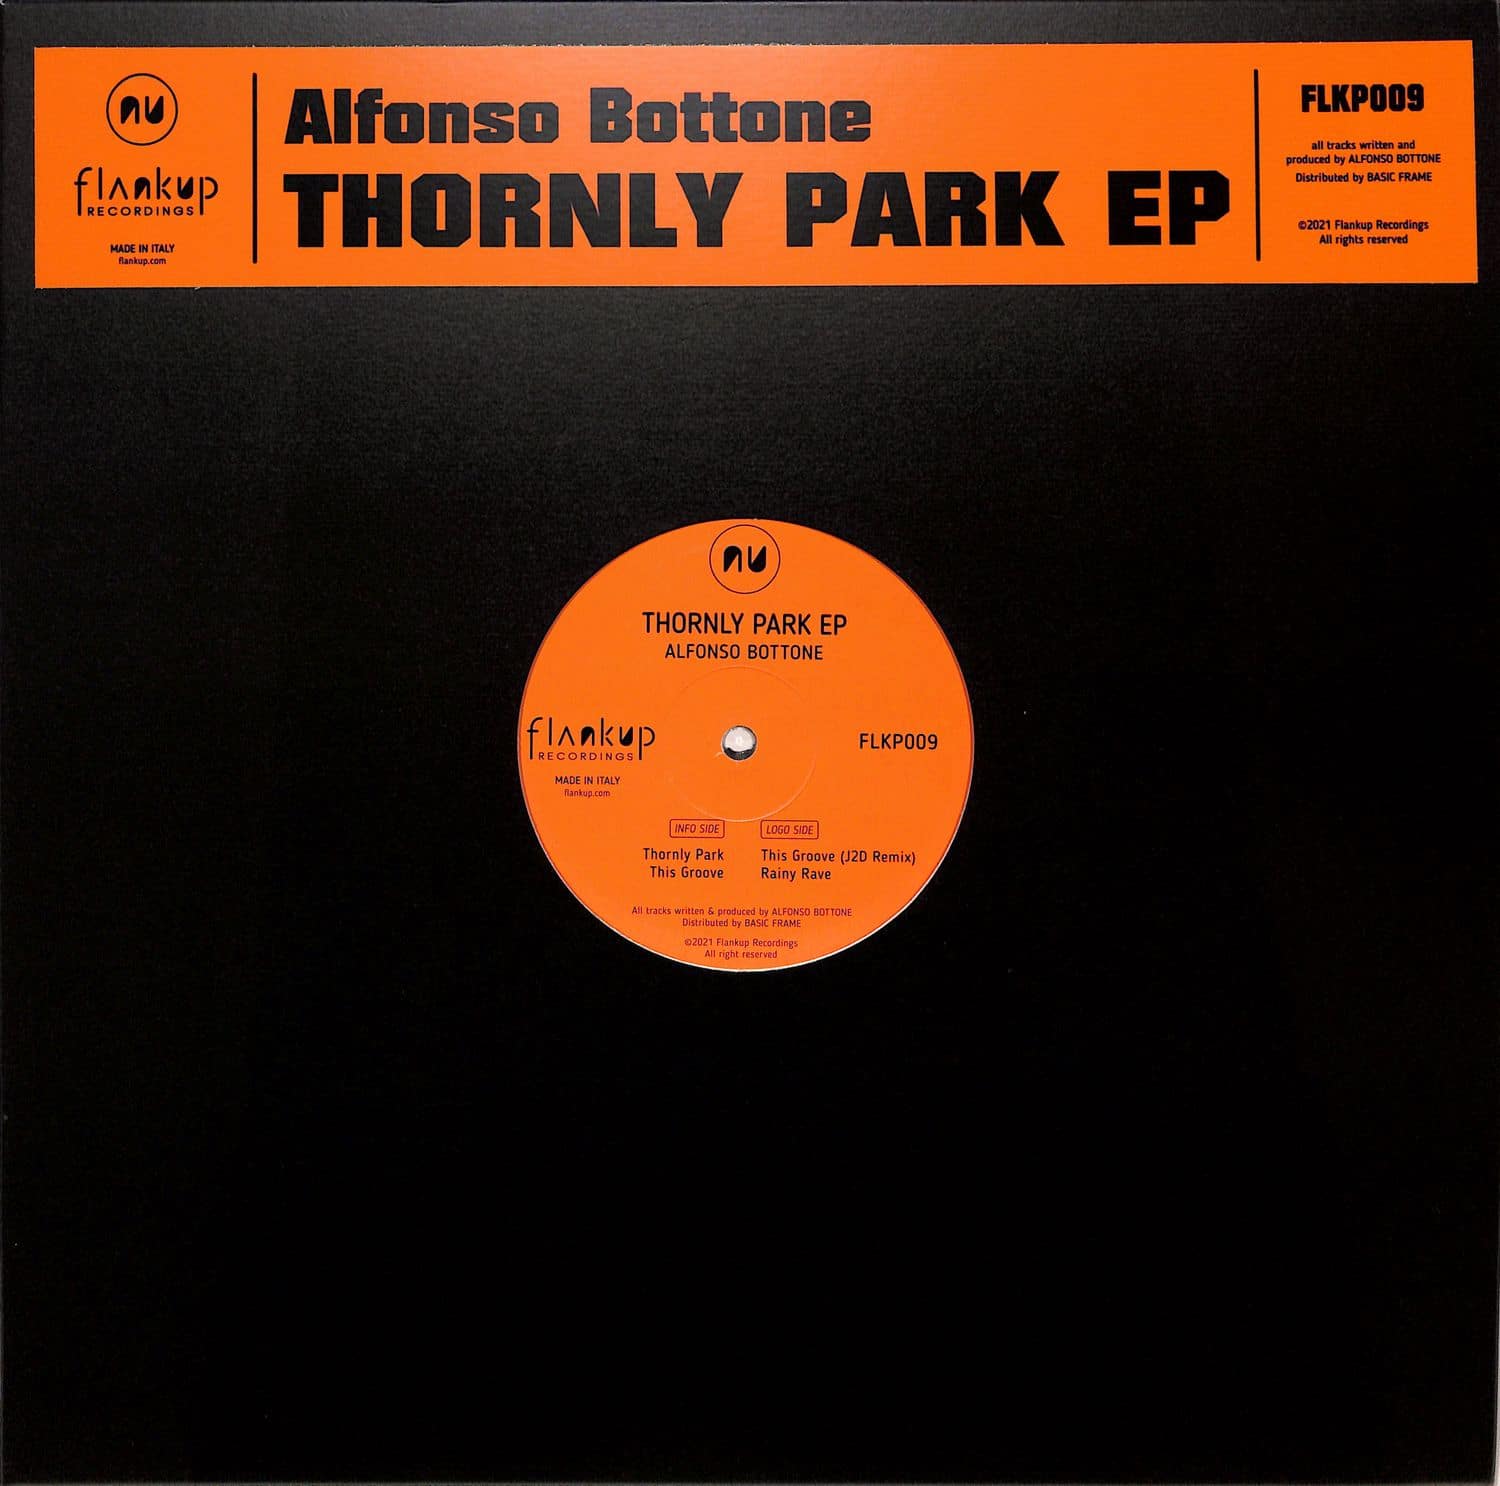 Alfonso Bottone - THORNLY PARK EP